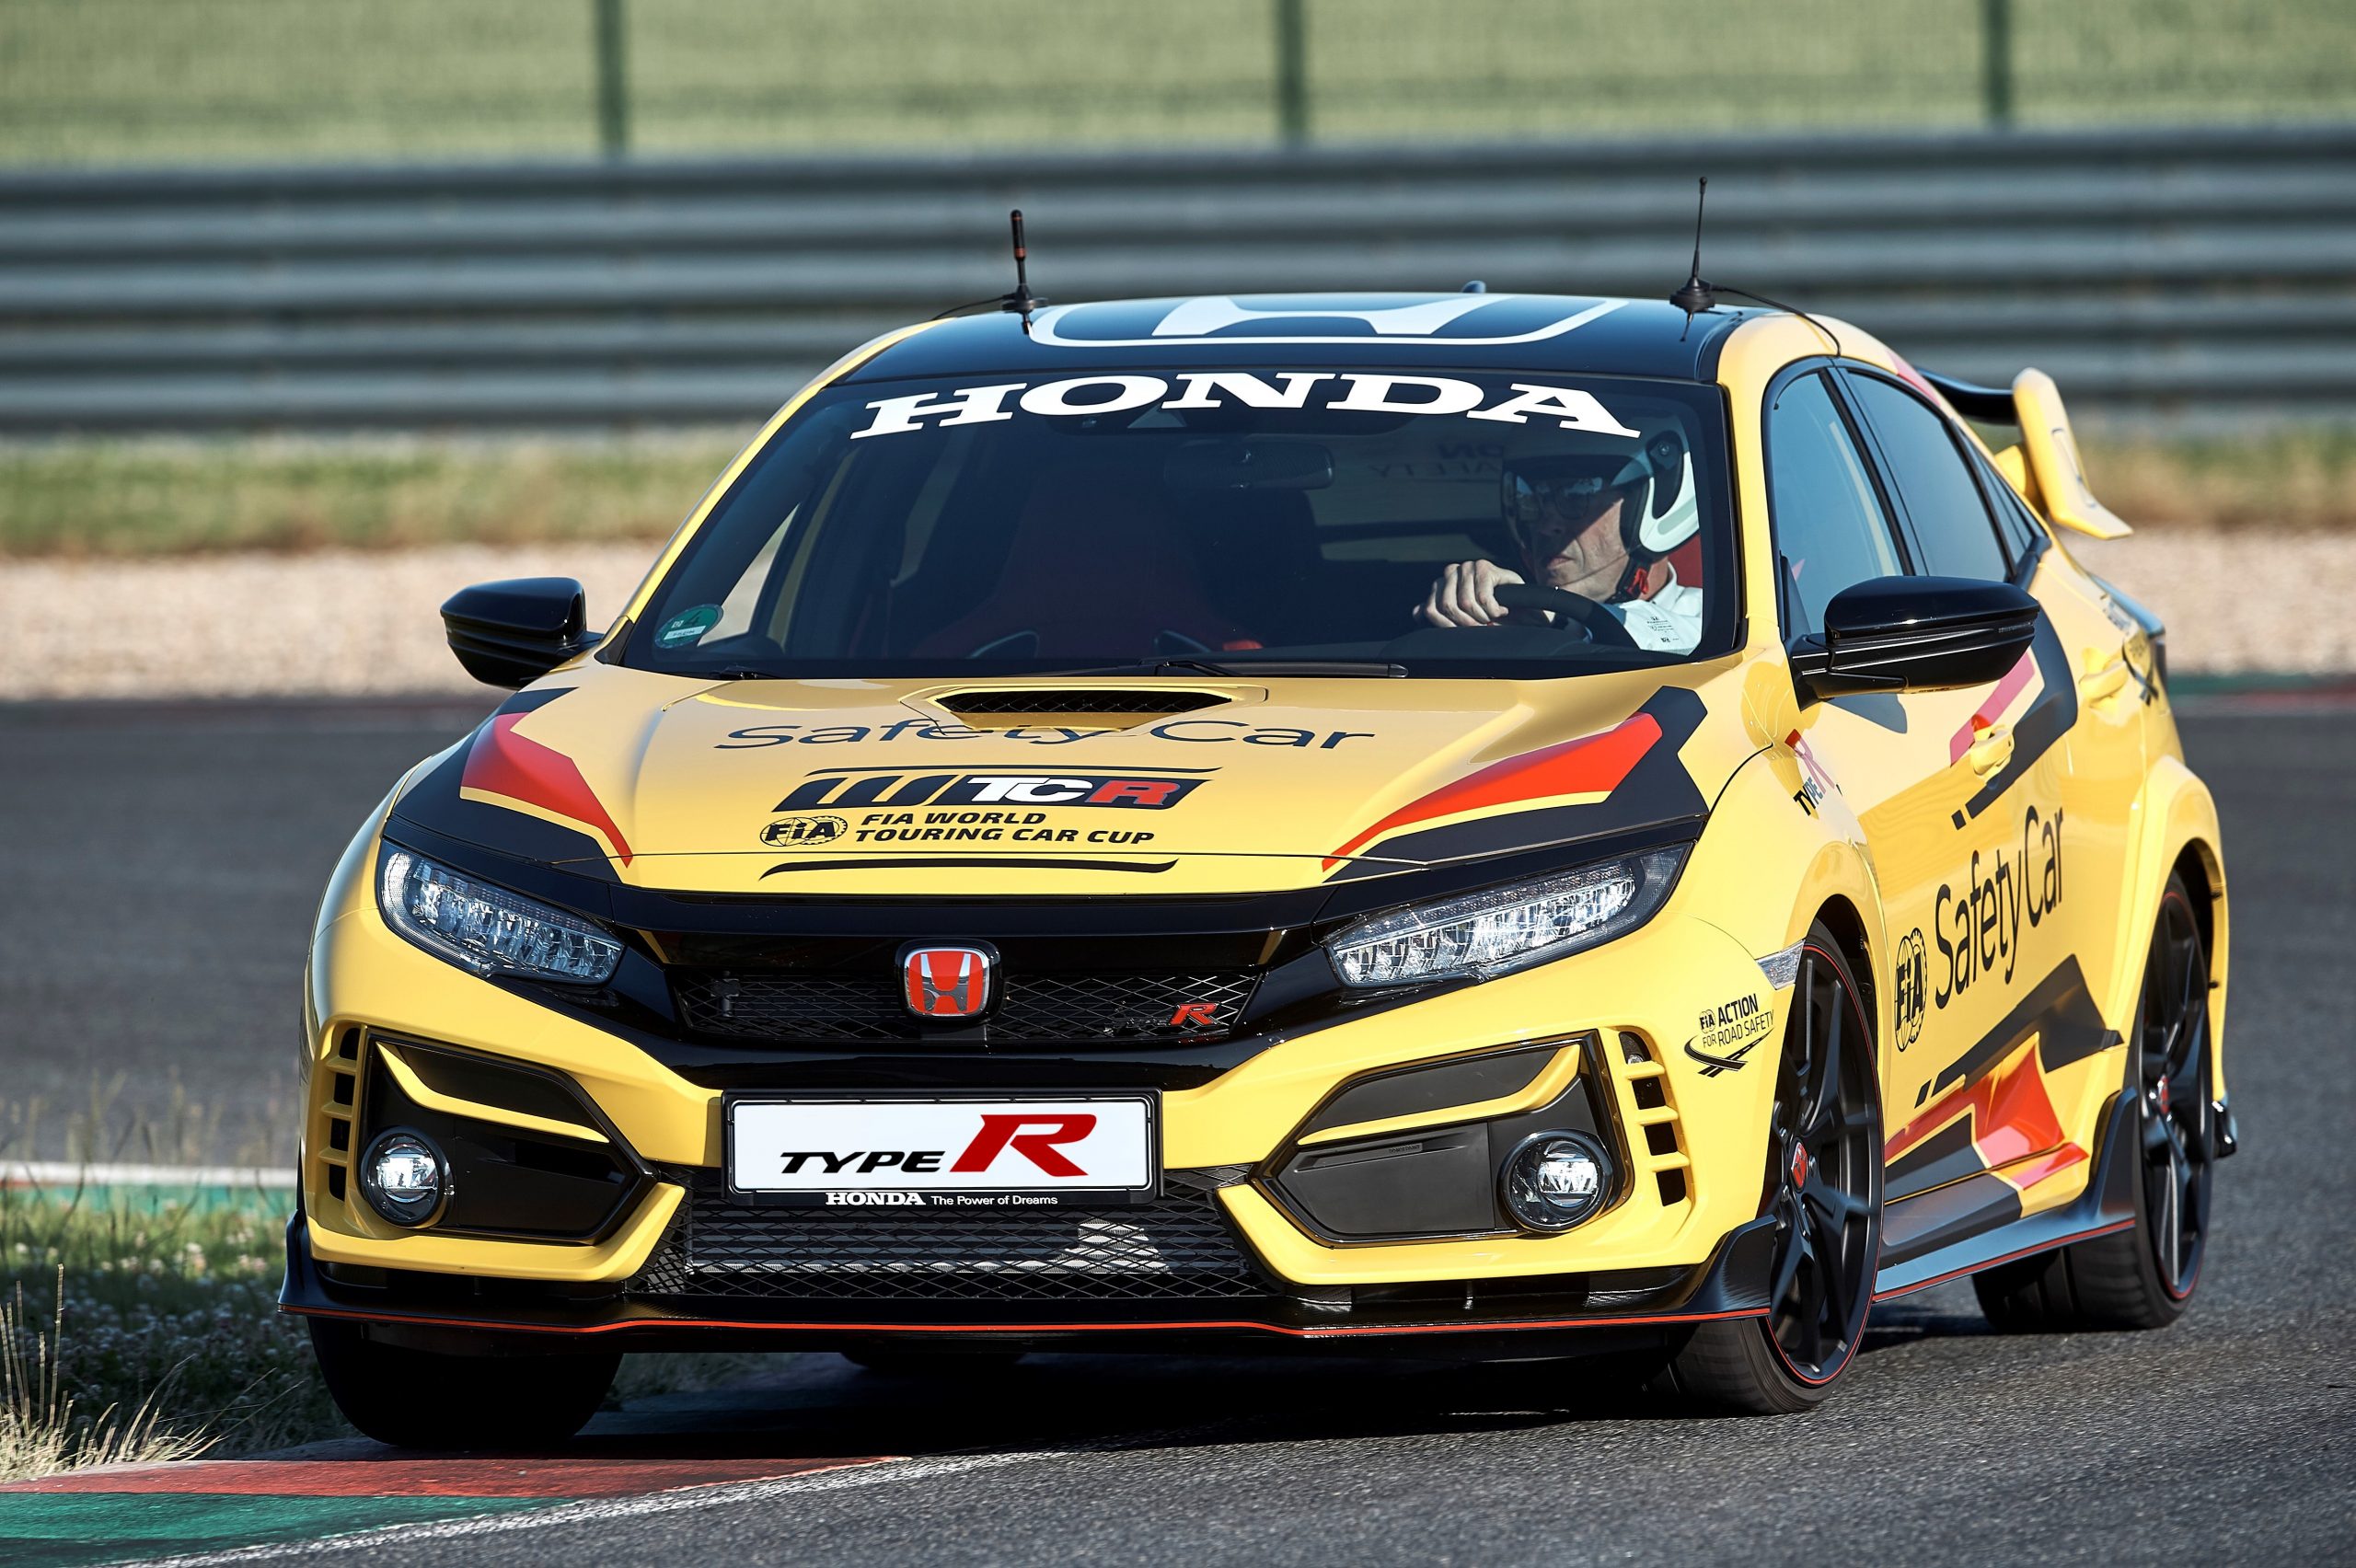 303939 Honda Civic Type R Limited Edition Is The 2020 WTCR Official Safety Car Scaled